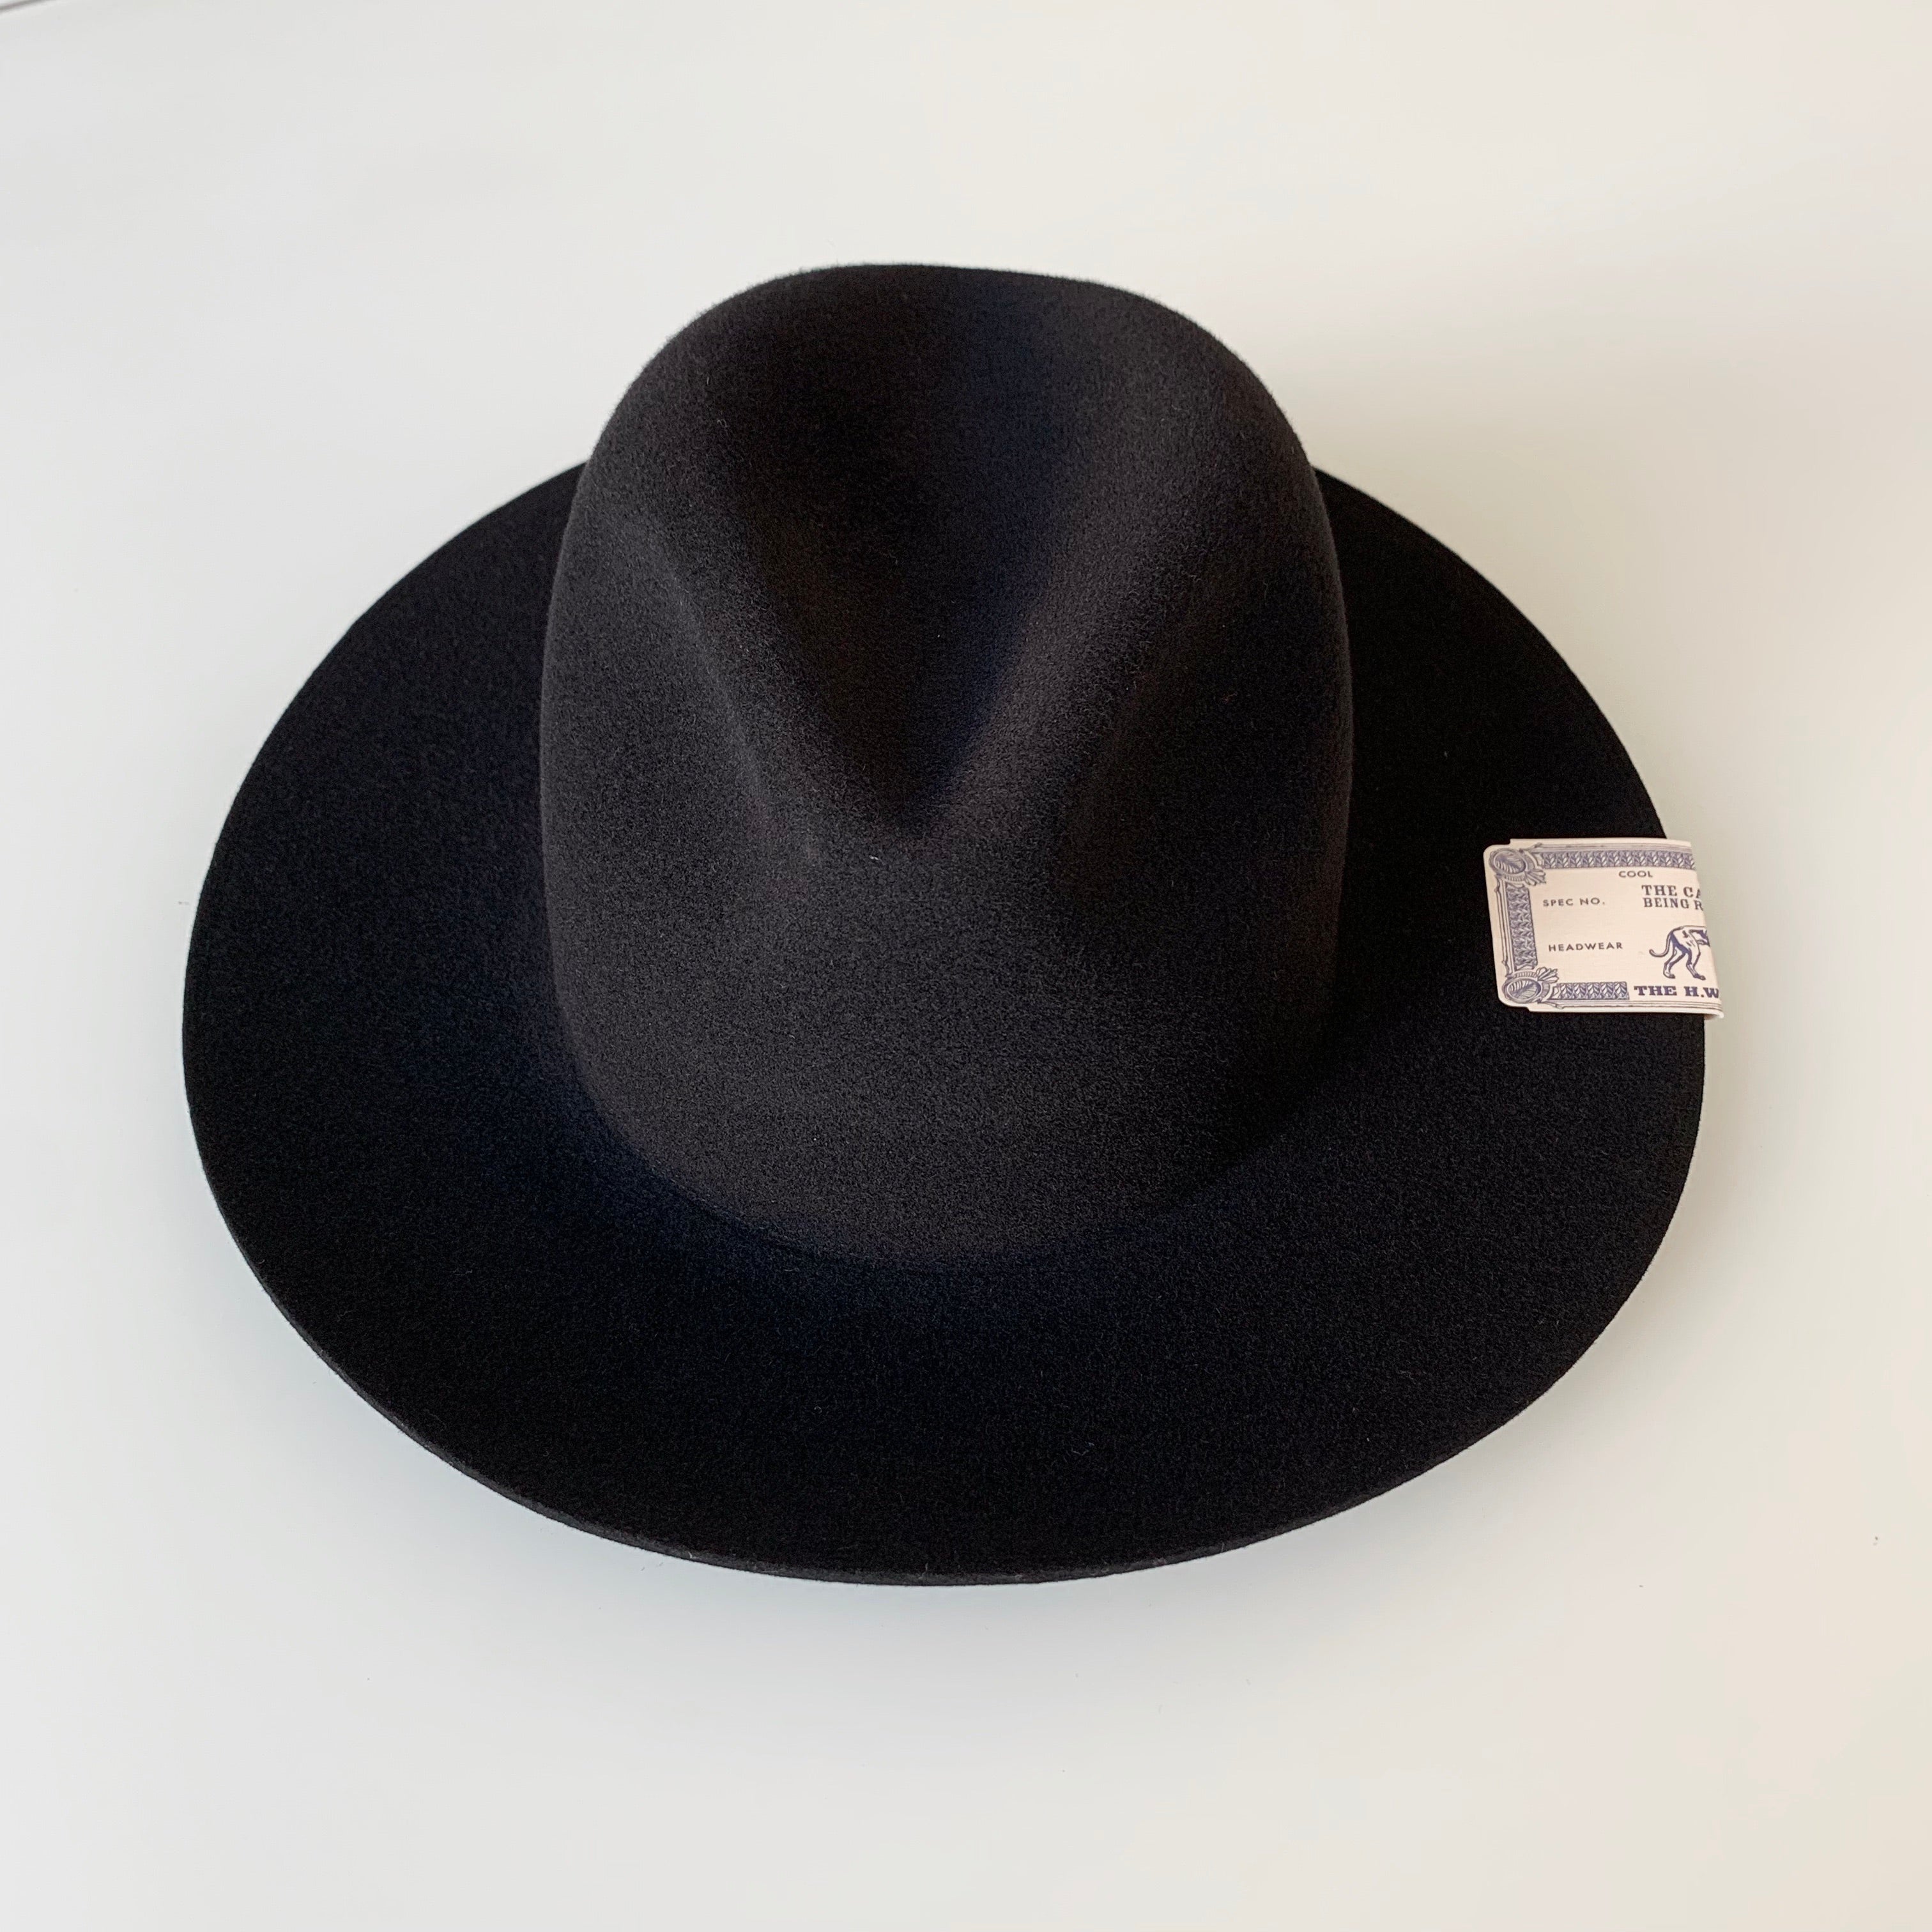 H. W. Dog Travelers Hat in Black at TEMPO Design Store SF CA